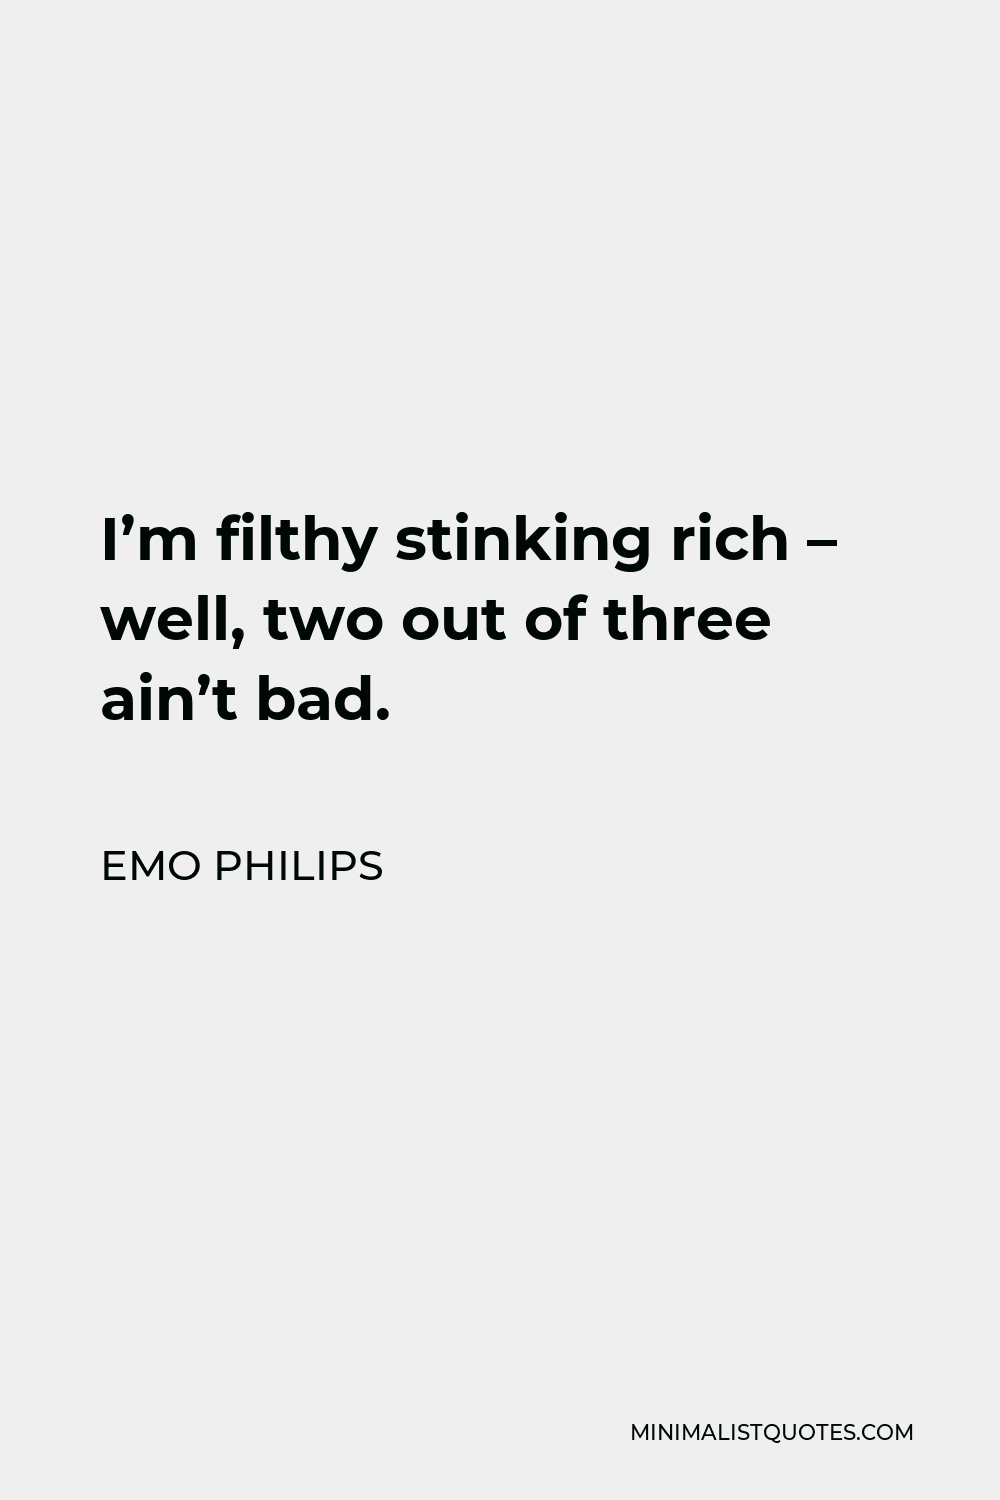 Emo Philips Quote - I’m filthy stinking rich – well, two out of three ain’t bad.